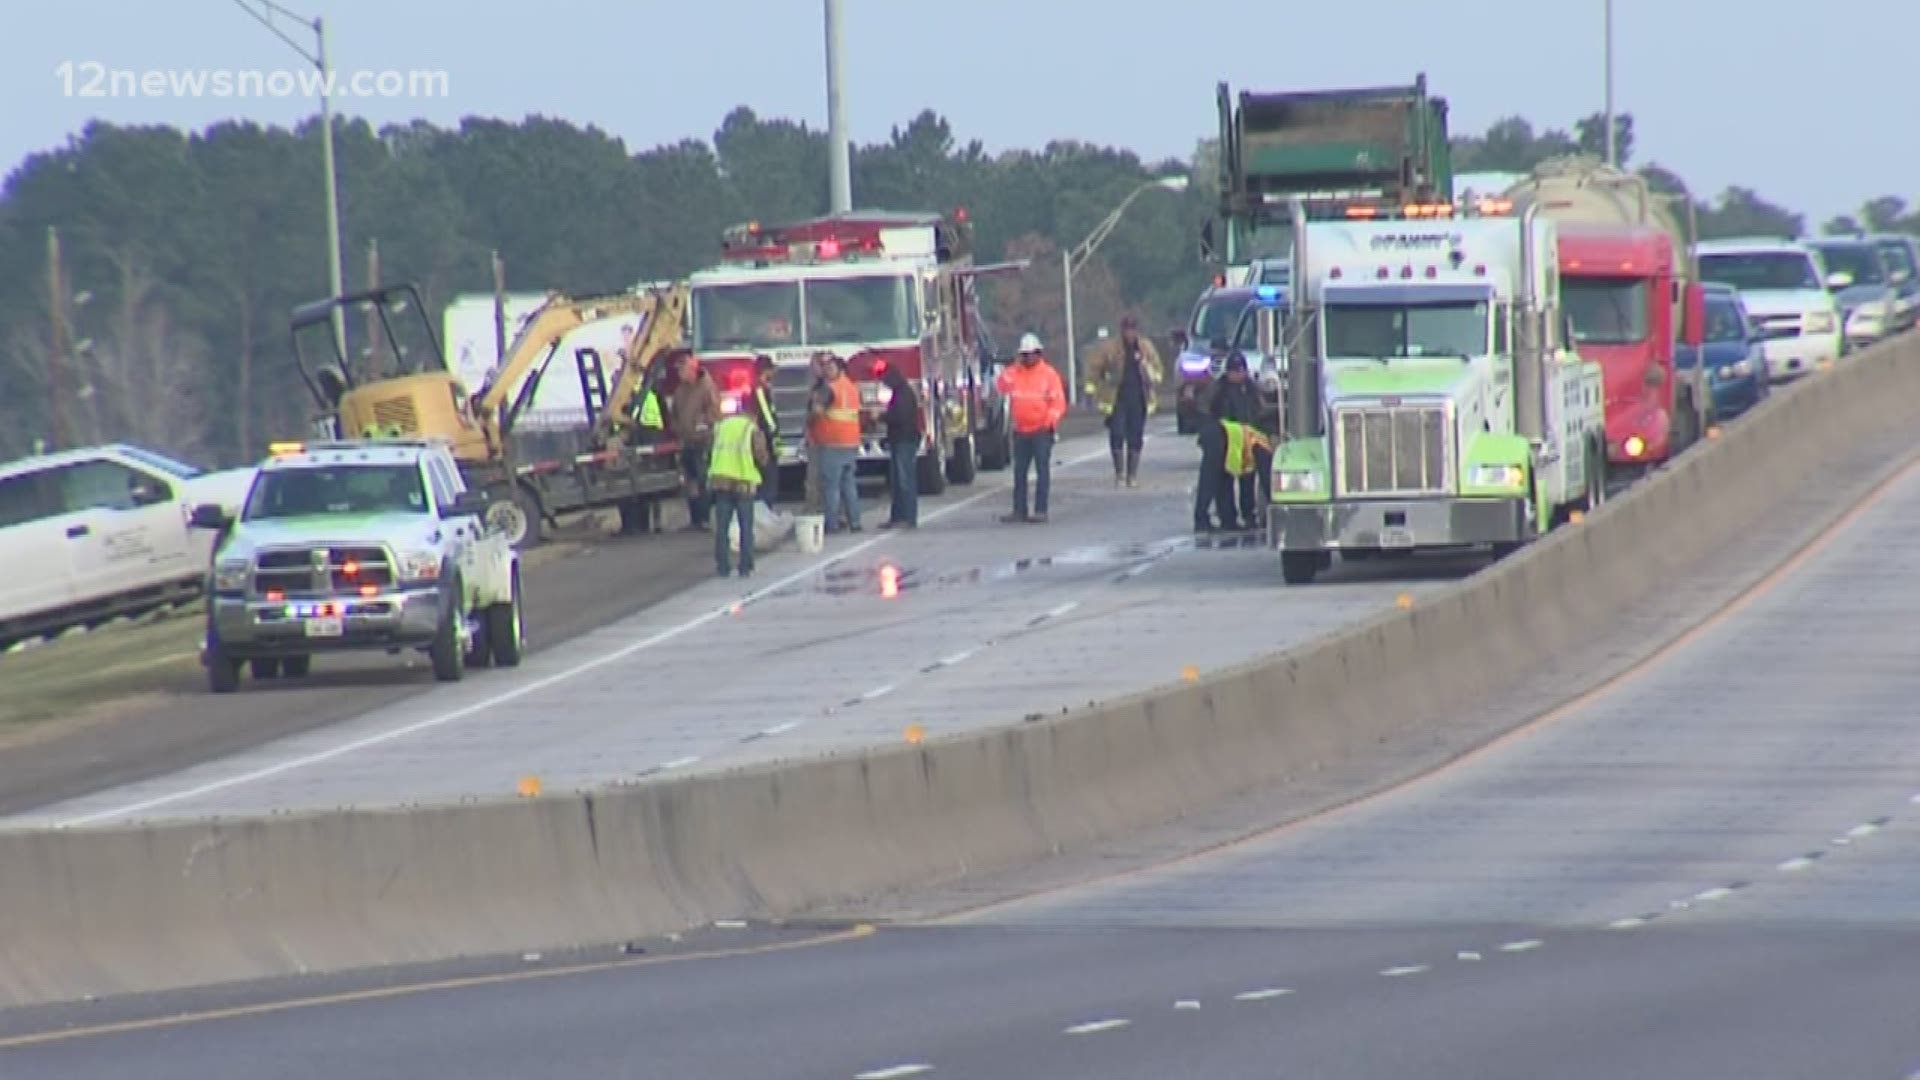 Monday morning wreck, fuel spill snarls traffic Monday morning along U.S. 69 in Beaumont